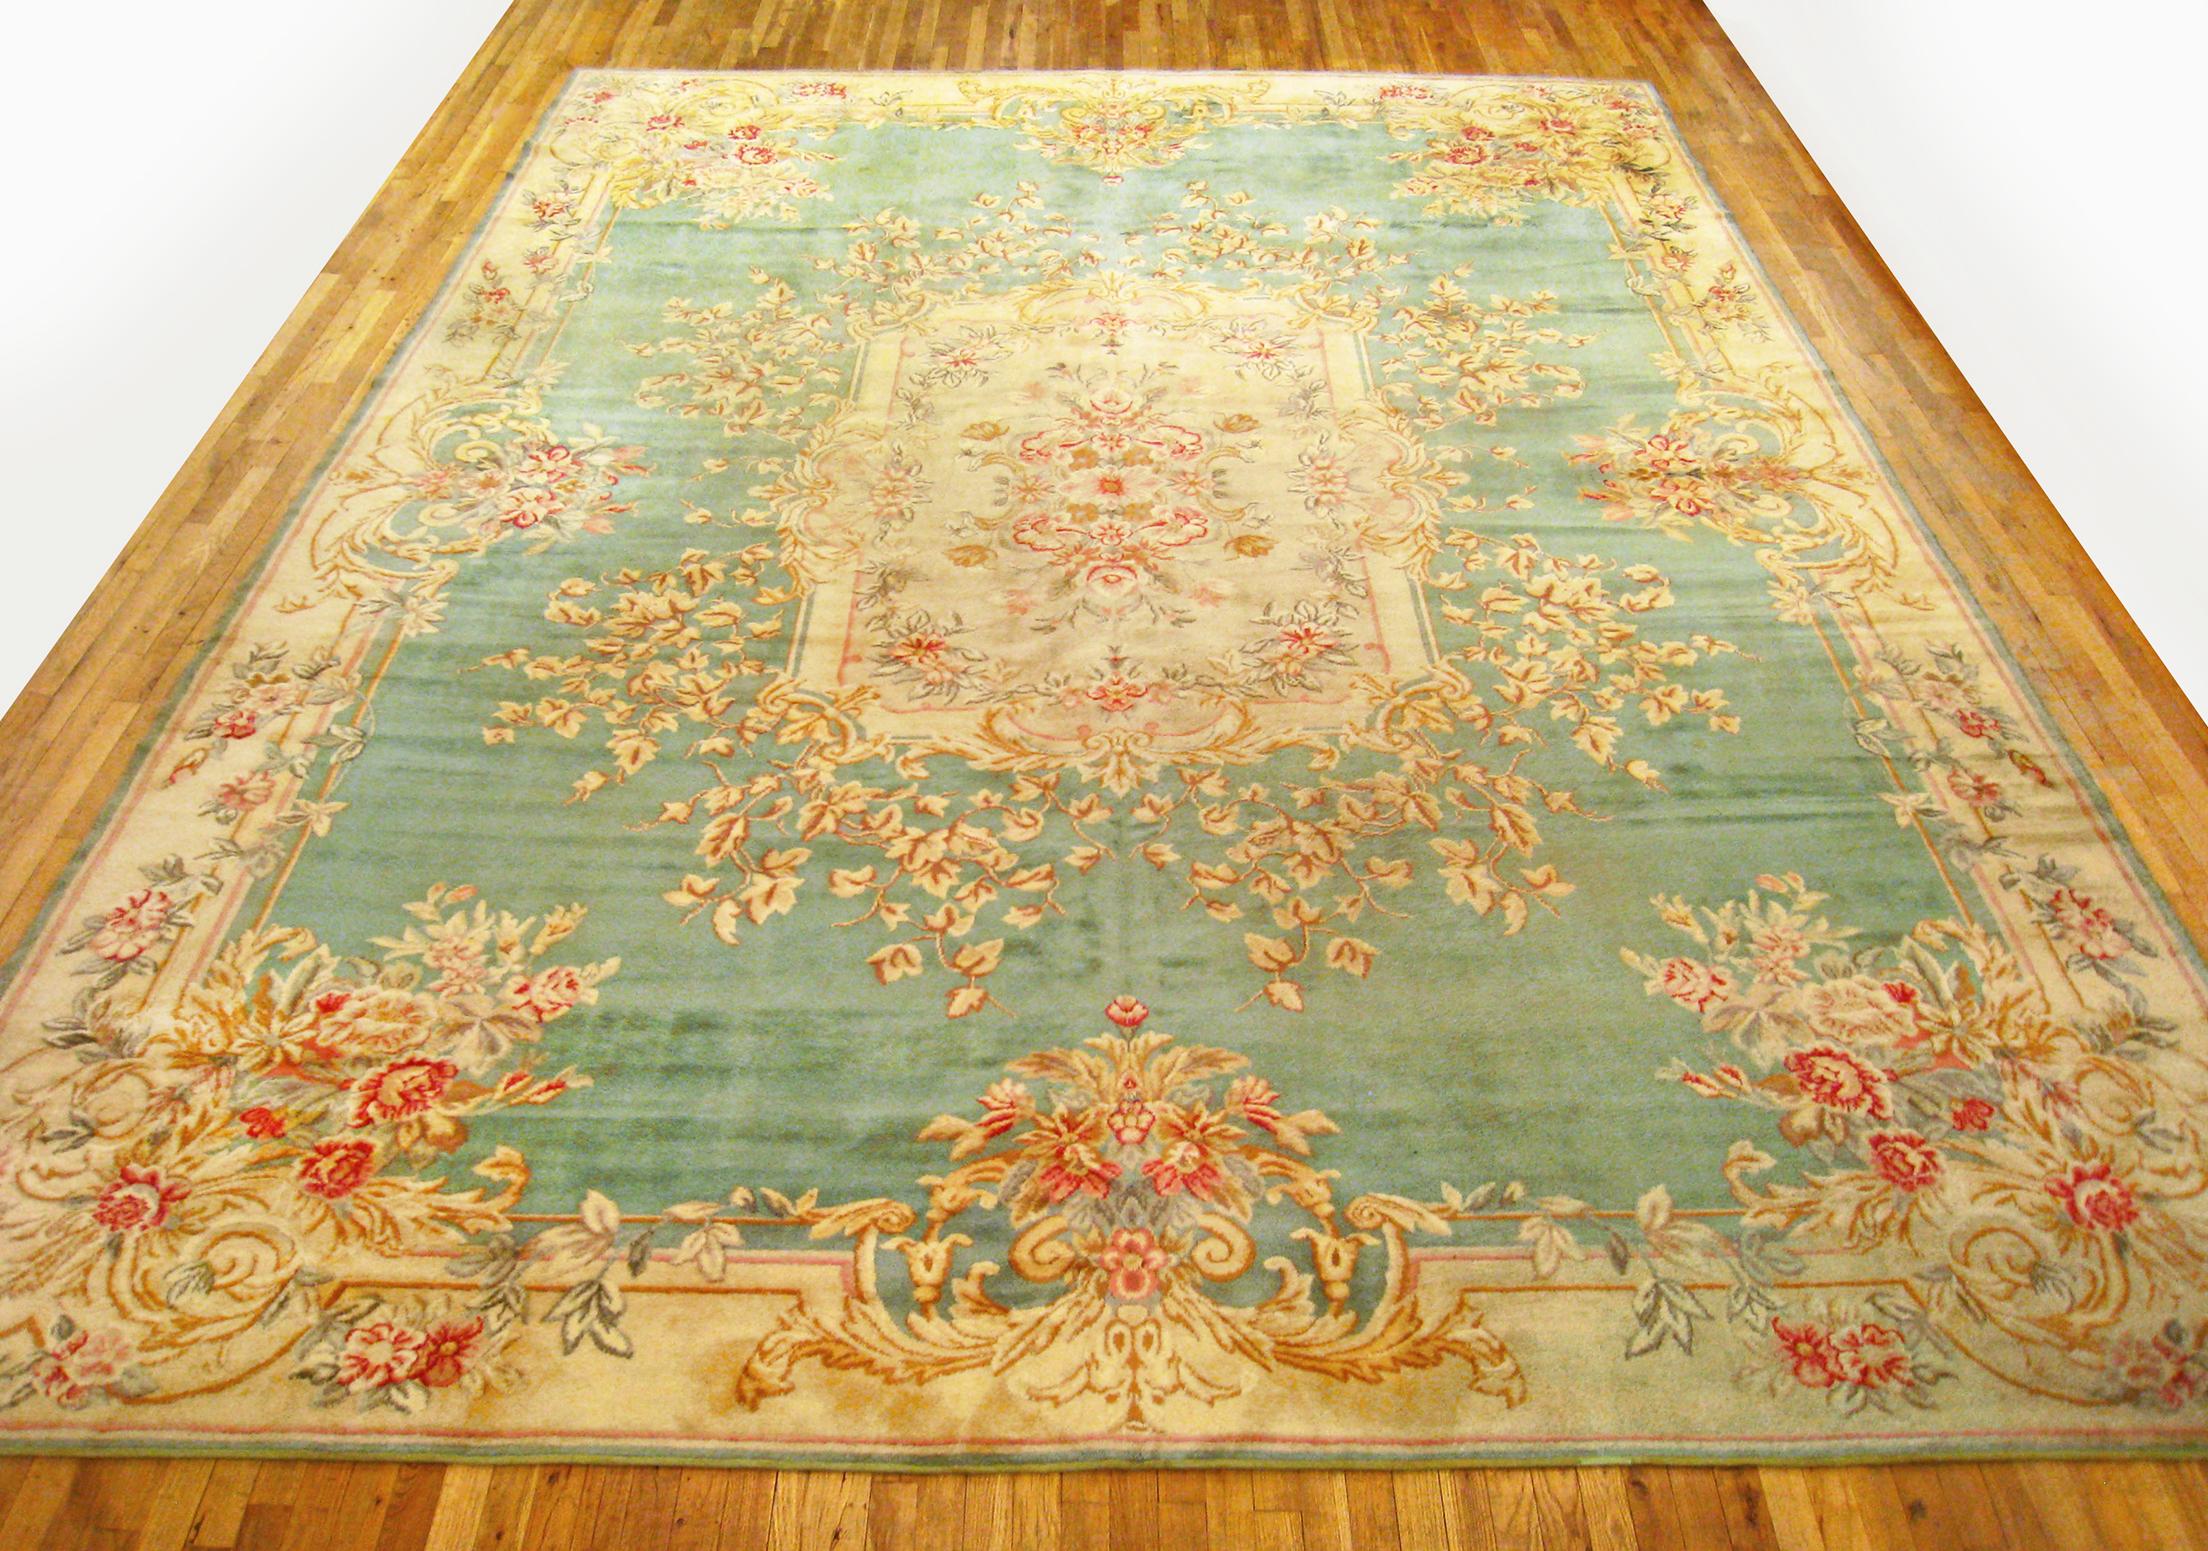 Antique French Savonnerie Rug, Large size, circa 1930

A one-of-a-kind antique European Savonnerie Oriental Carpet, hand-knotted with short wool pile. This beautiful rug features a central medallion on the light blue primary field, with beige outer